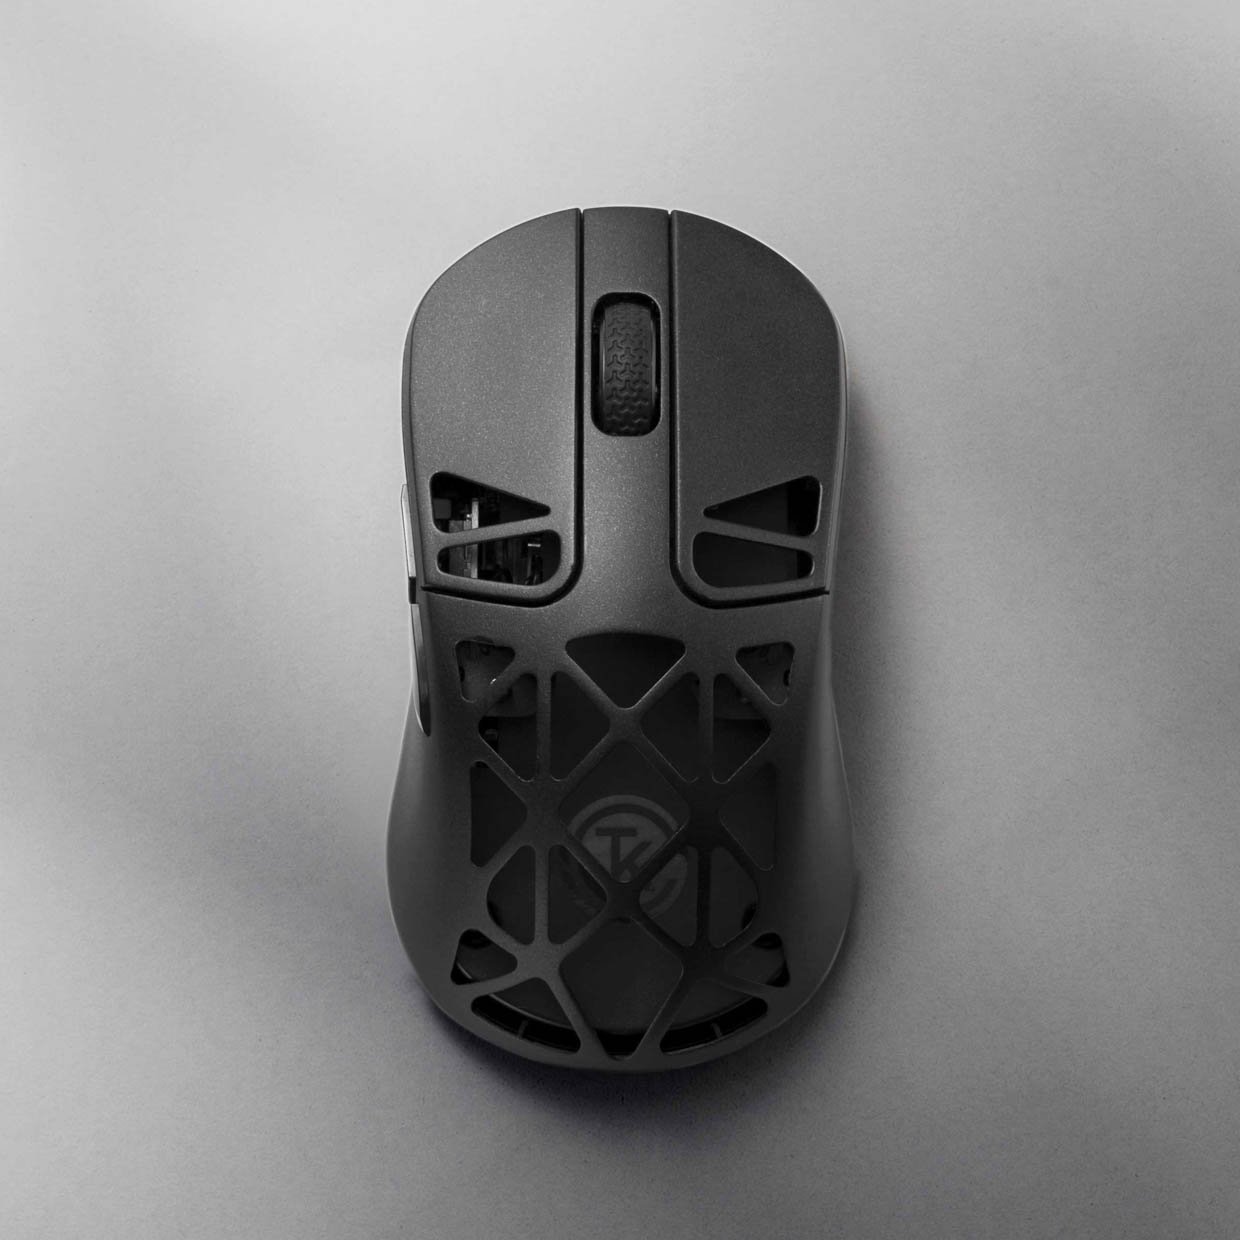 The Keychron M3 Mini 4K Metal Wireless Mouse Has a Magnesium Shell